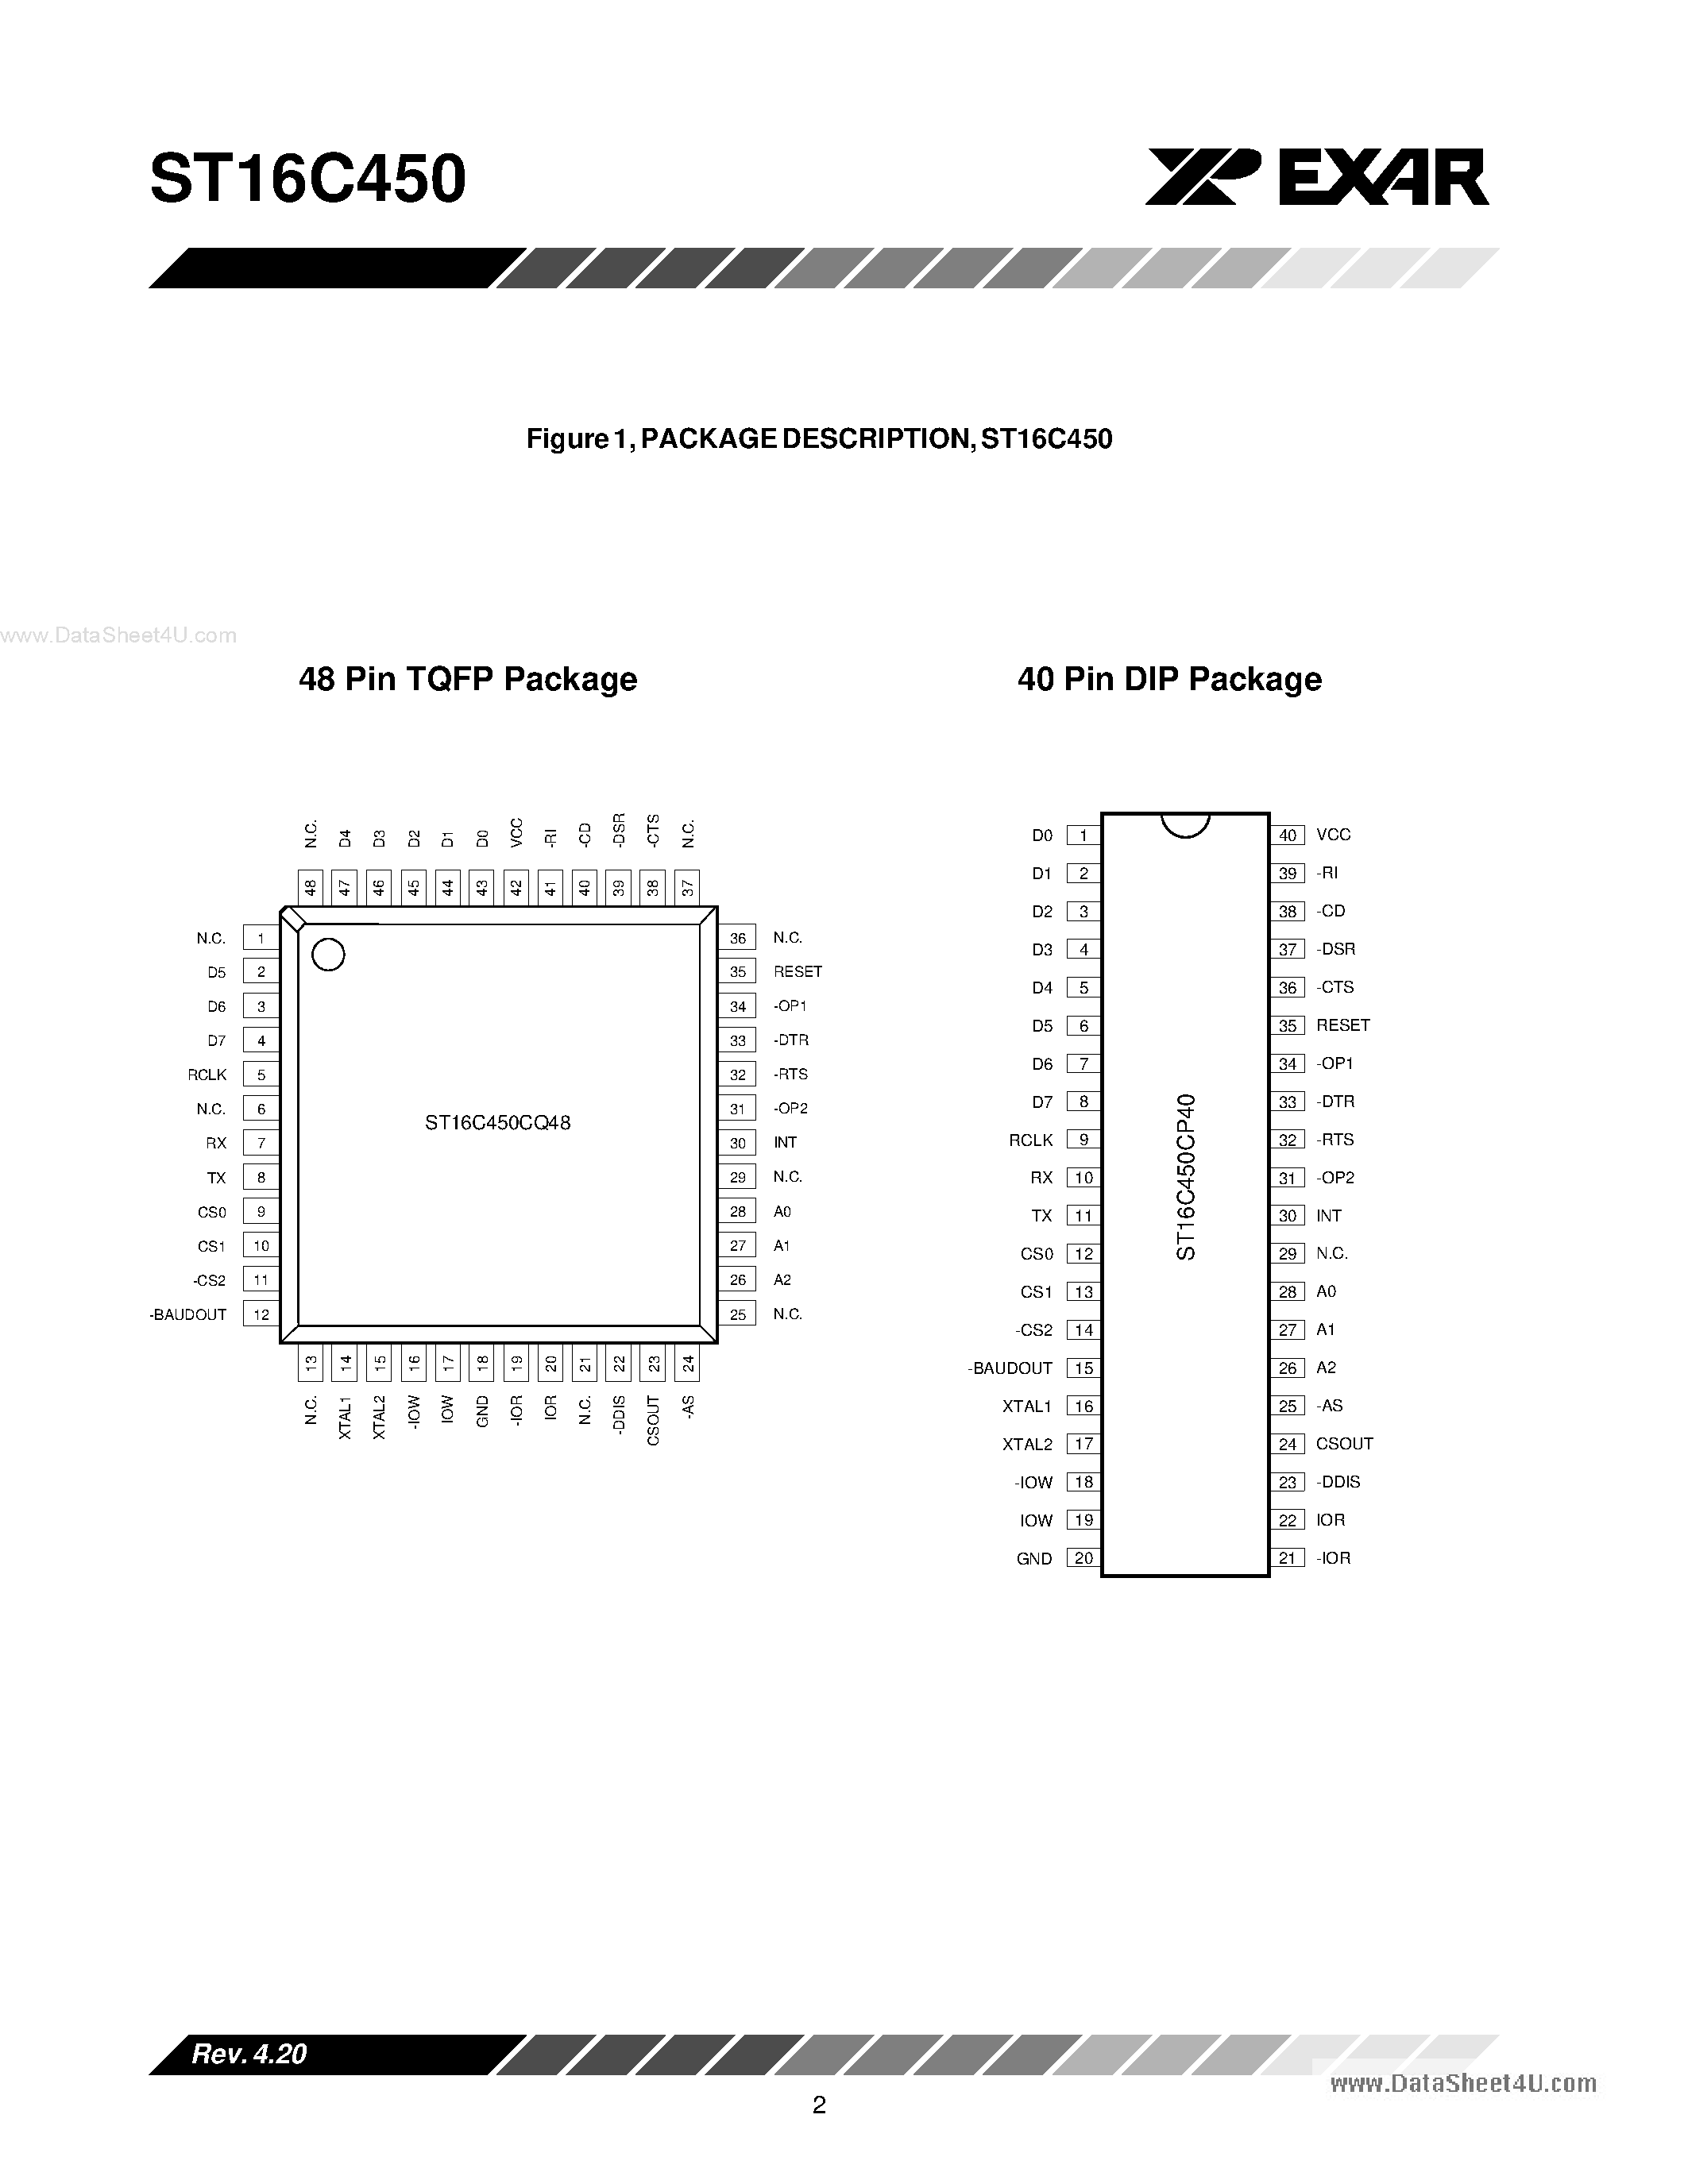 Datasheet 16C450 - Search ---> ST16C450 page 2